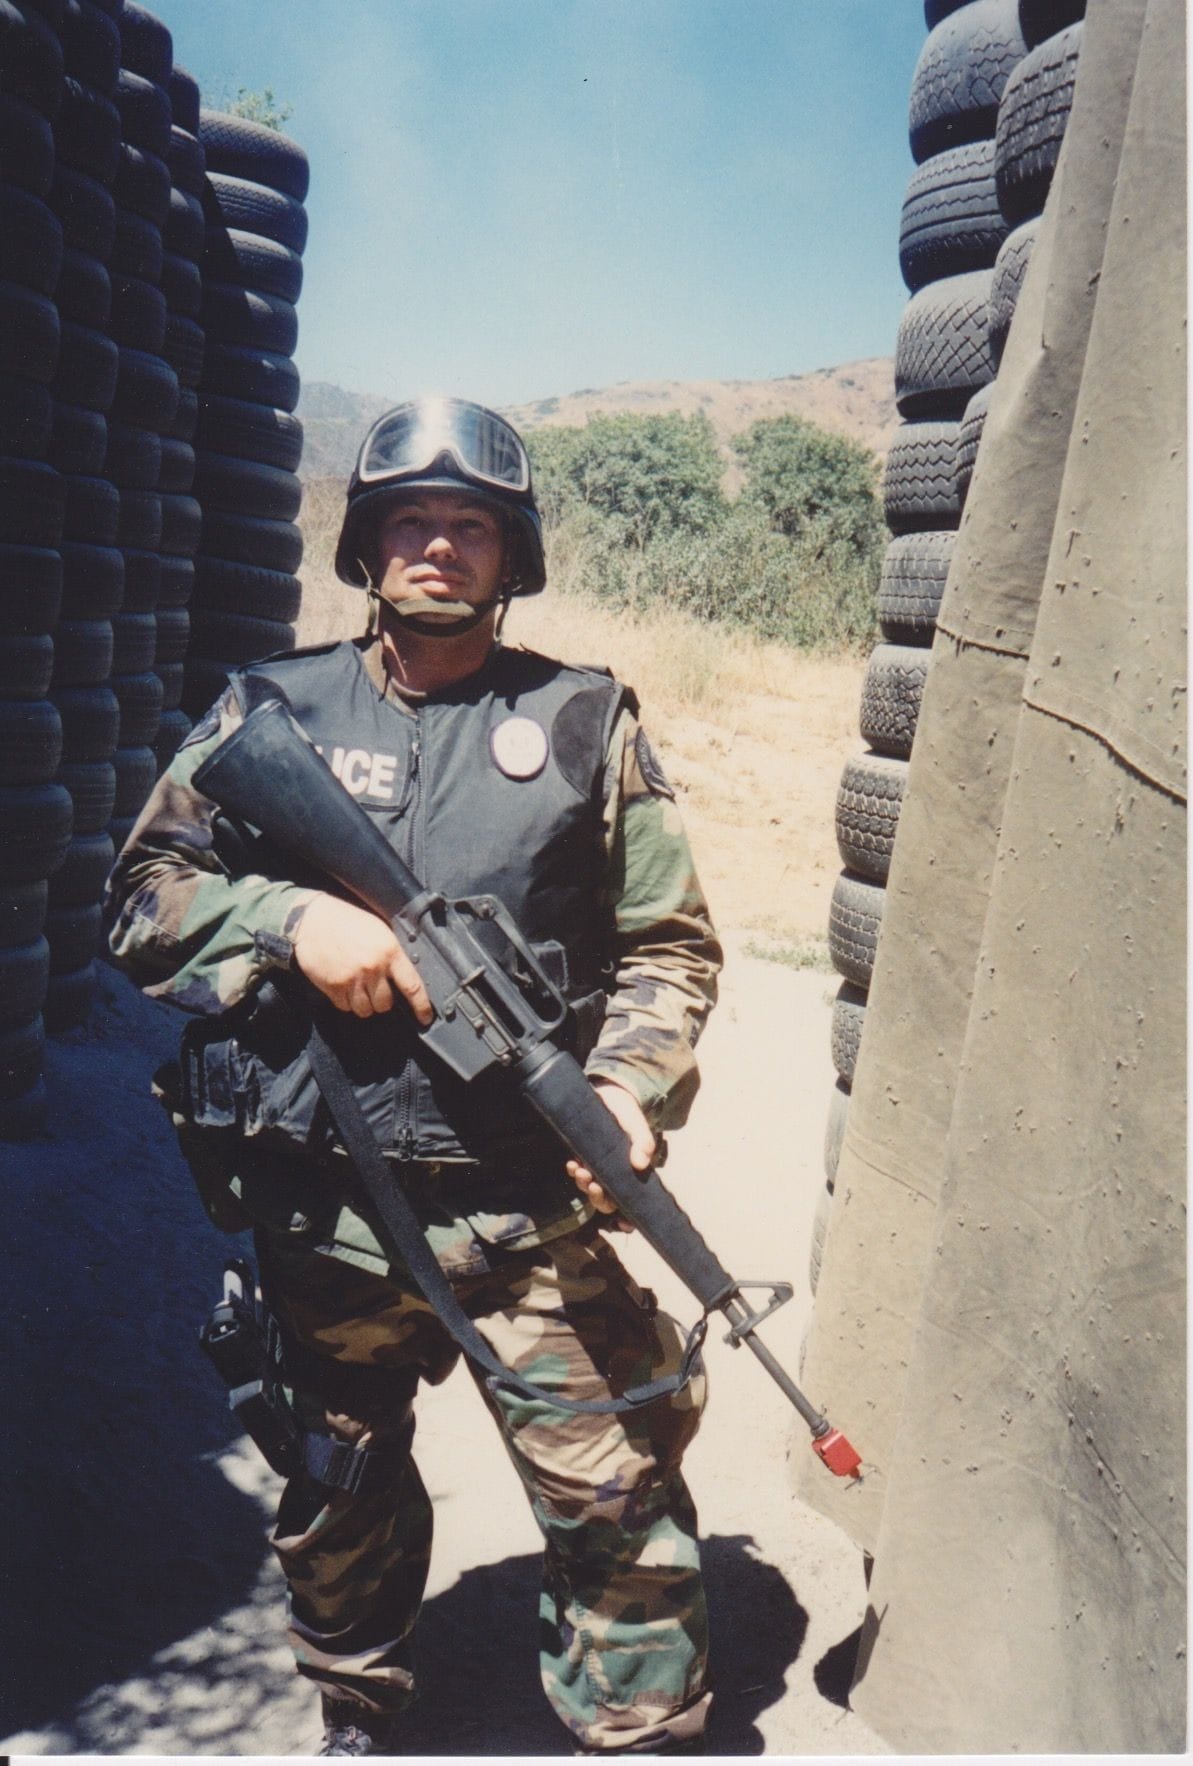 Jim was a SWAT officer with his police department for three years. In this photo he is at a shoot house for live-fire AR-15 rifle training.